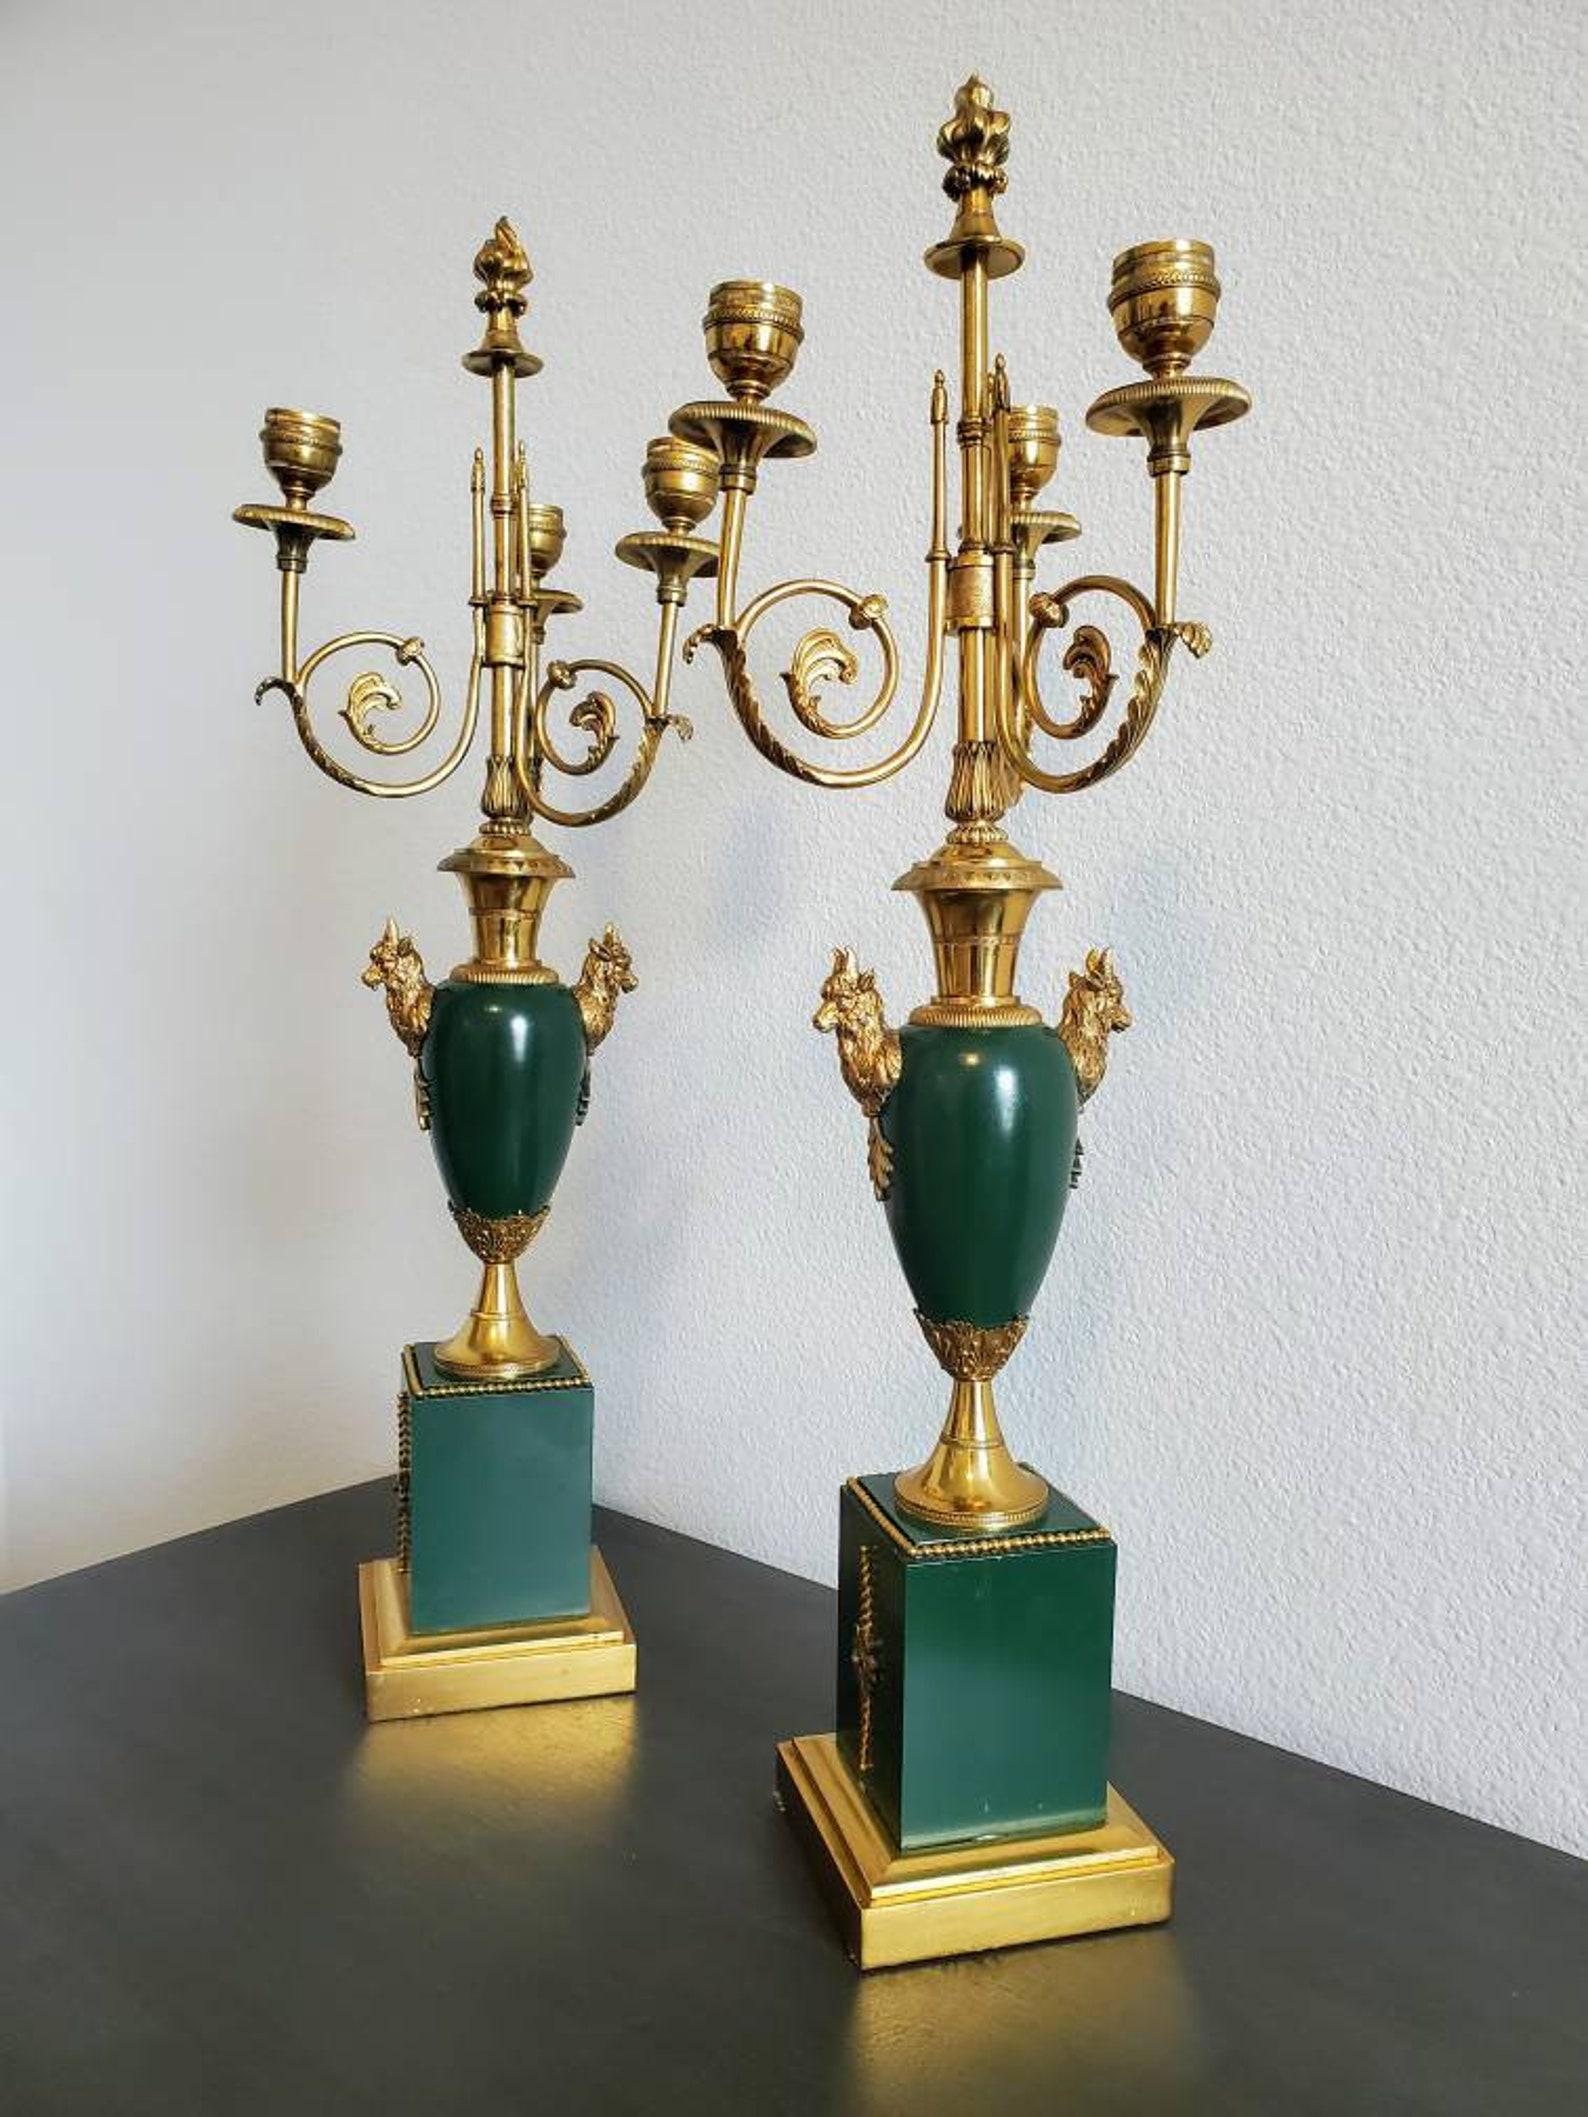 Pair of Early 19th Century French Empire Period Candelabras For Sale 4